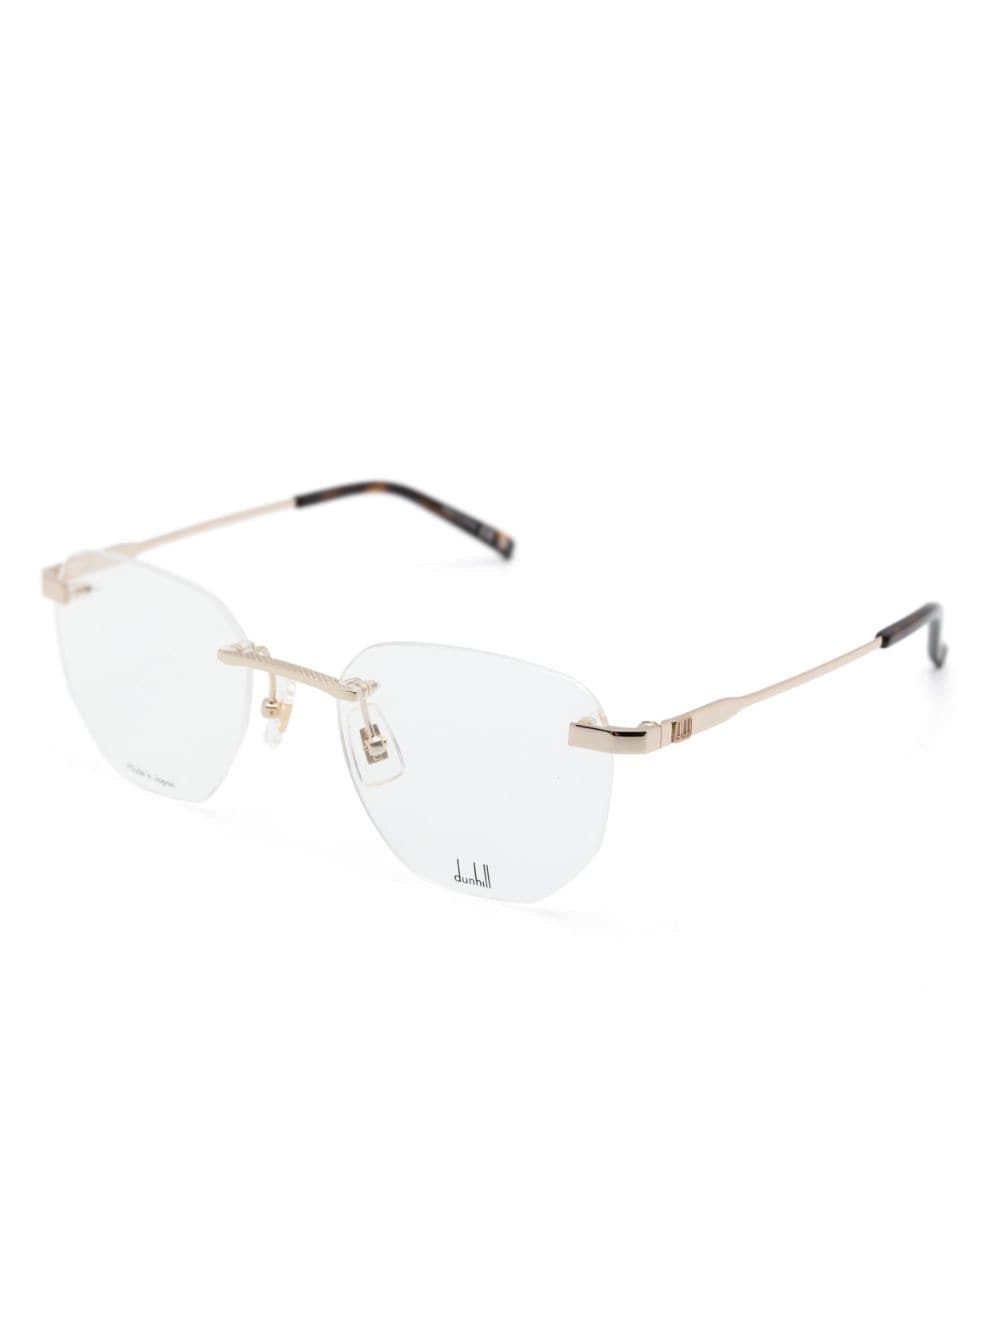 Image 2 of Dunhill thin-arms frameless glasses